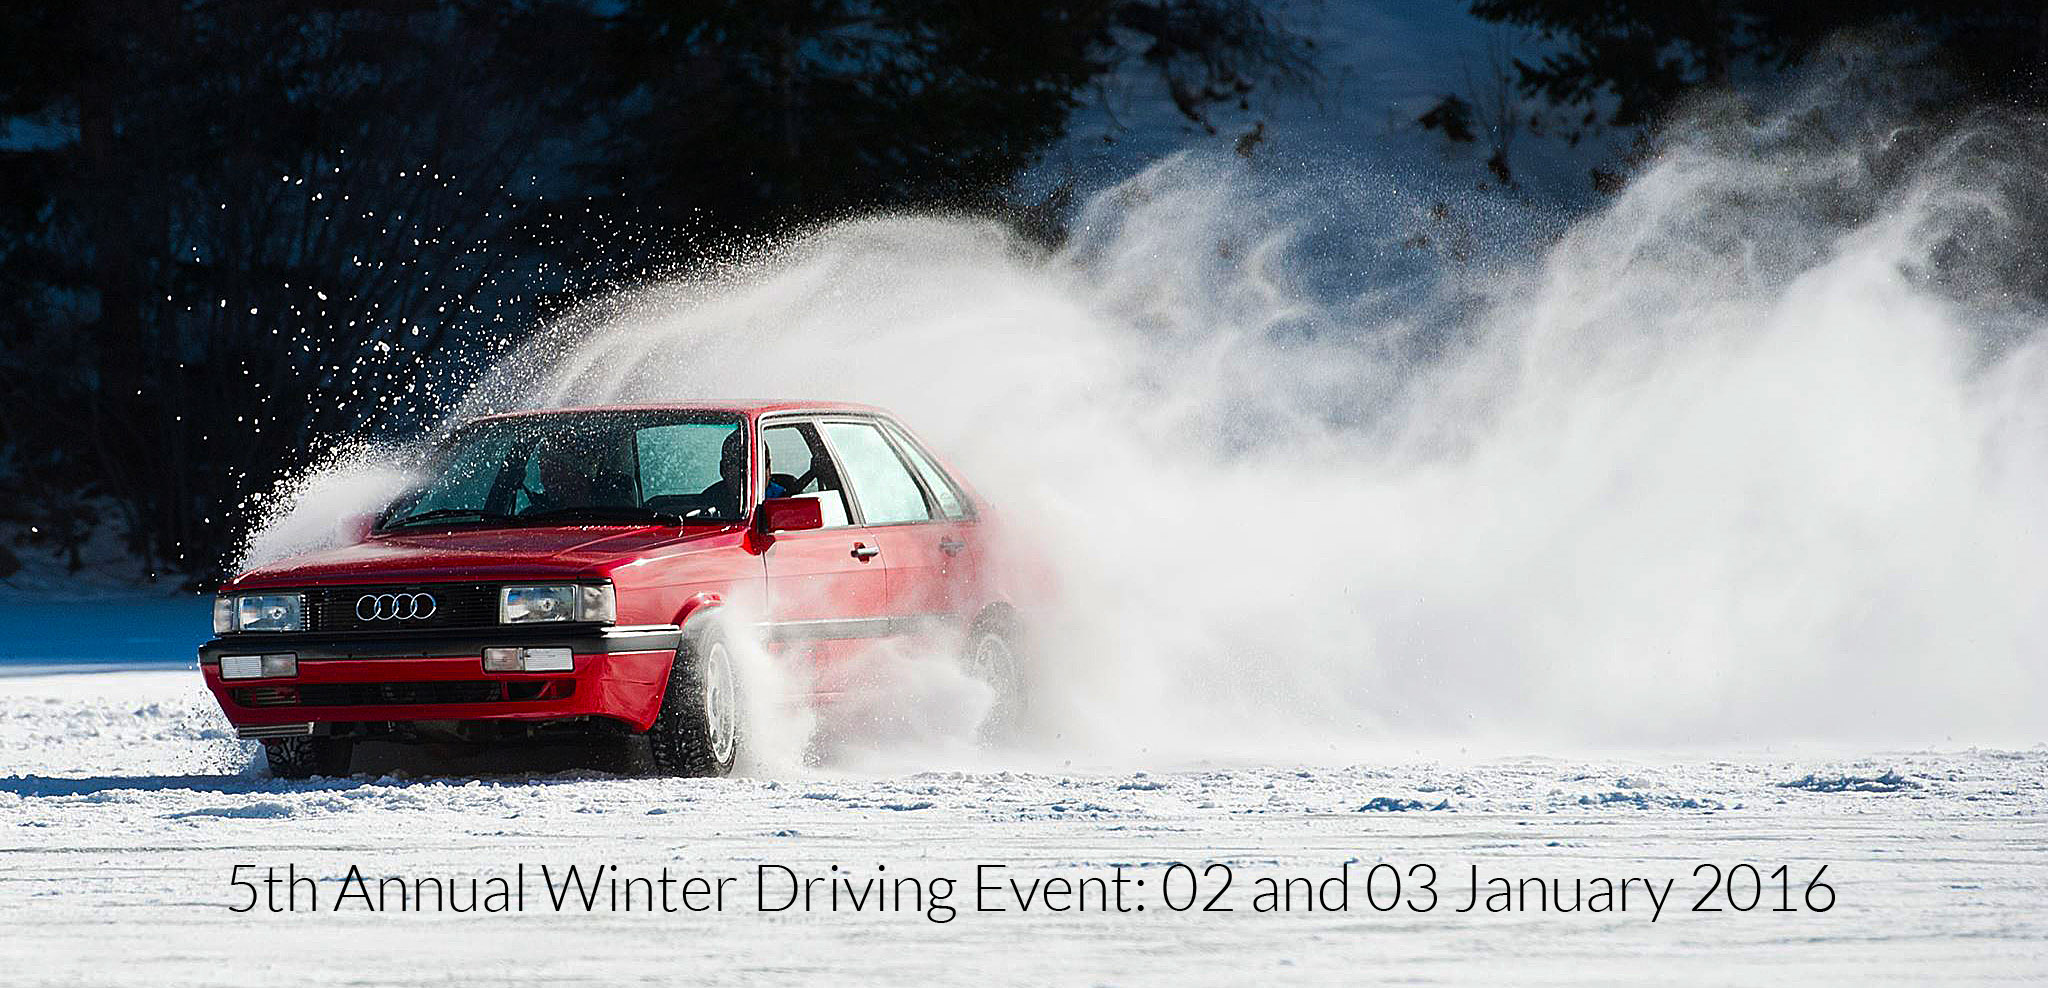 5th Annual Winter Driving Event: 02 and 03 January 2016